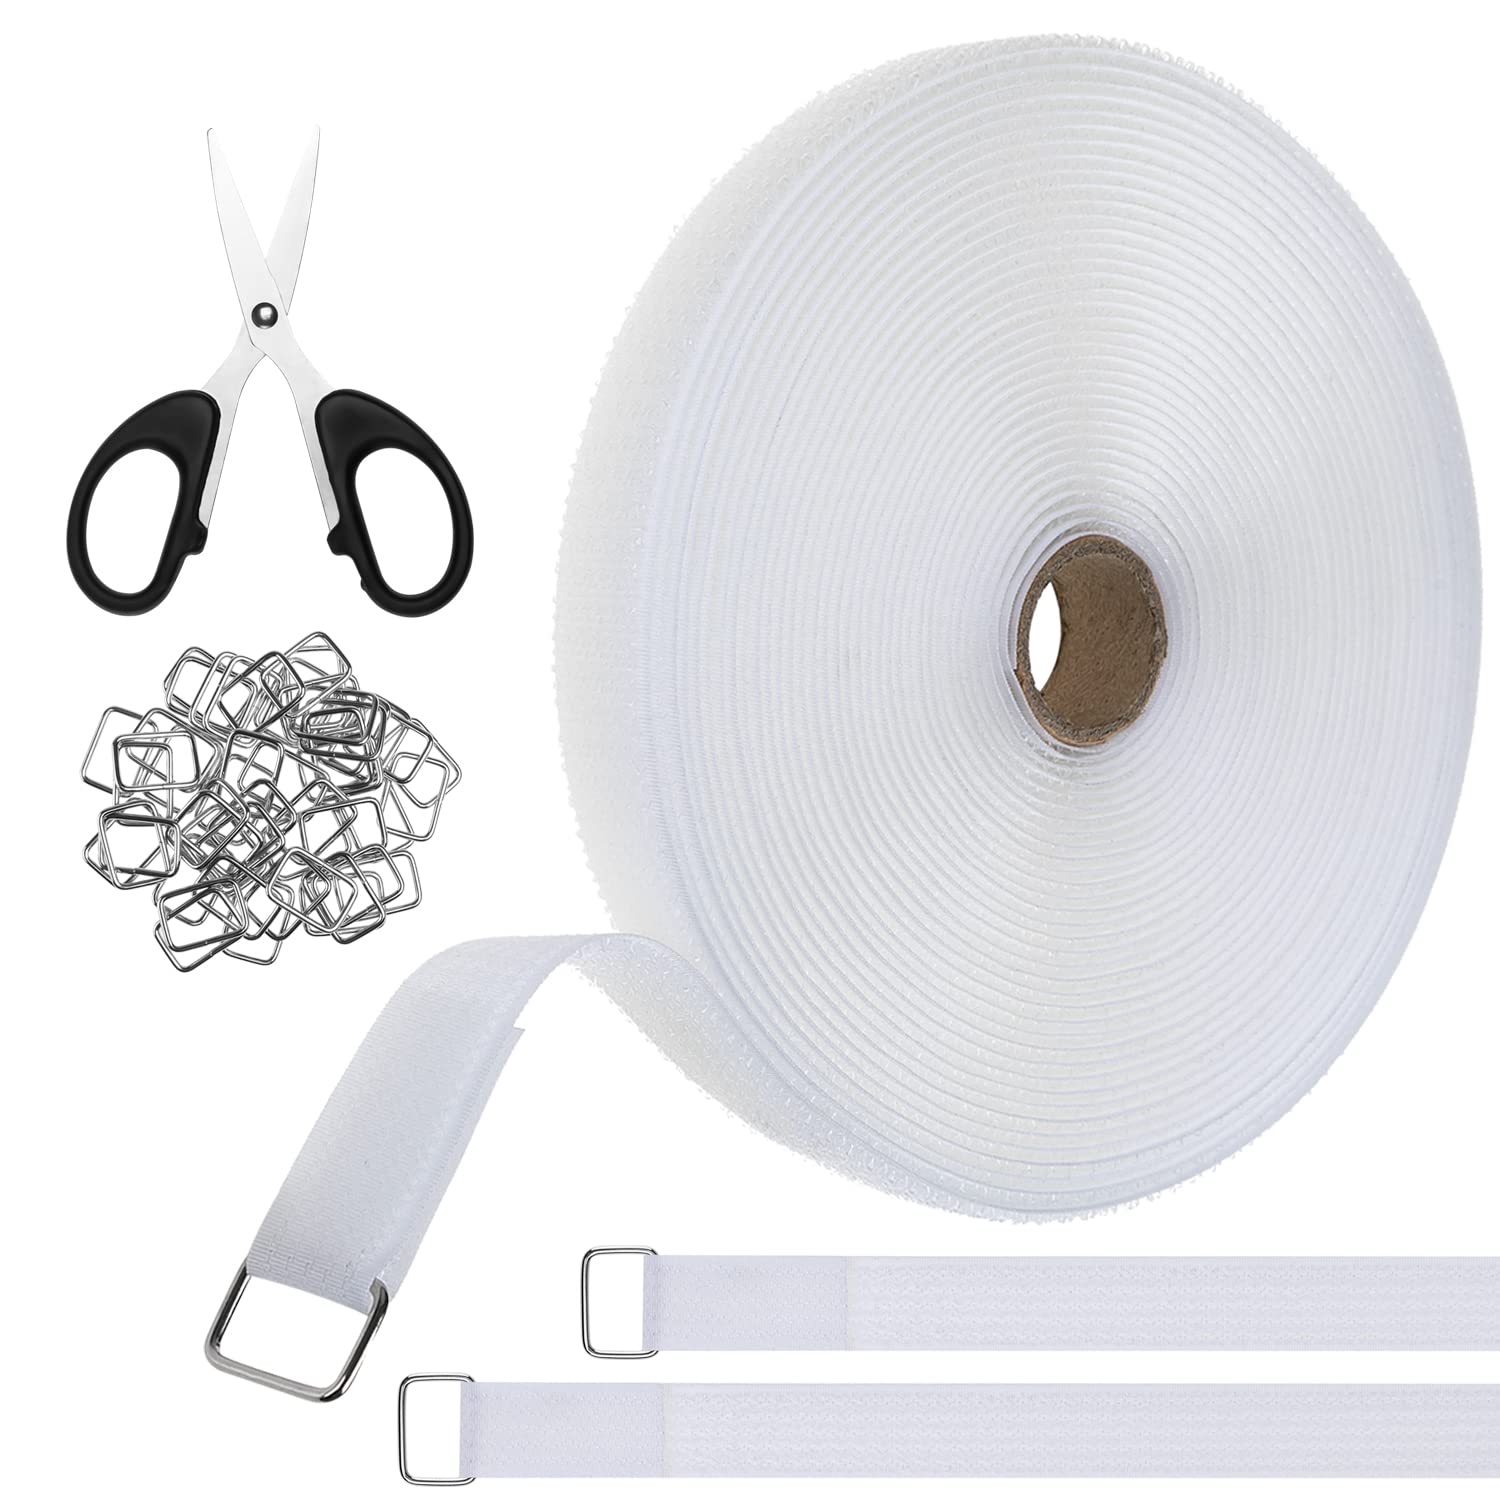 Nearockle 36ft Hook and Loop Straps Adjustable Cut-to-Length Cable Straps 3/4  Inch Reusable